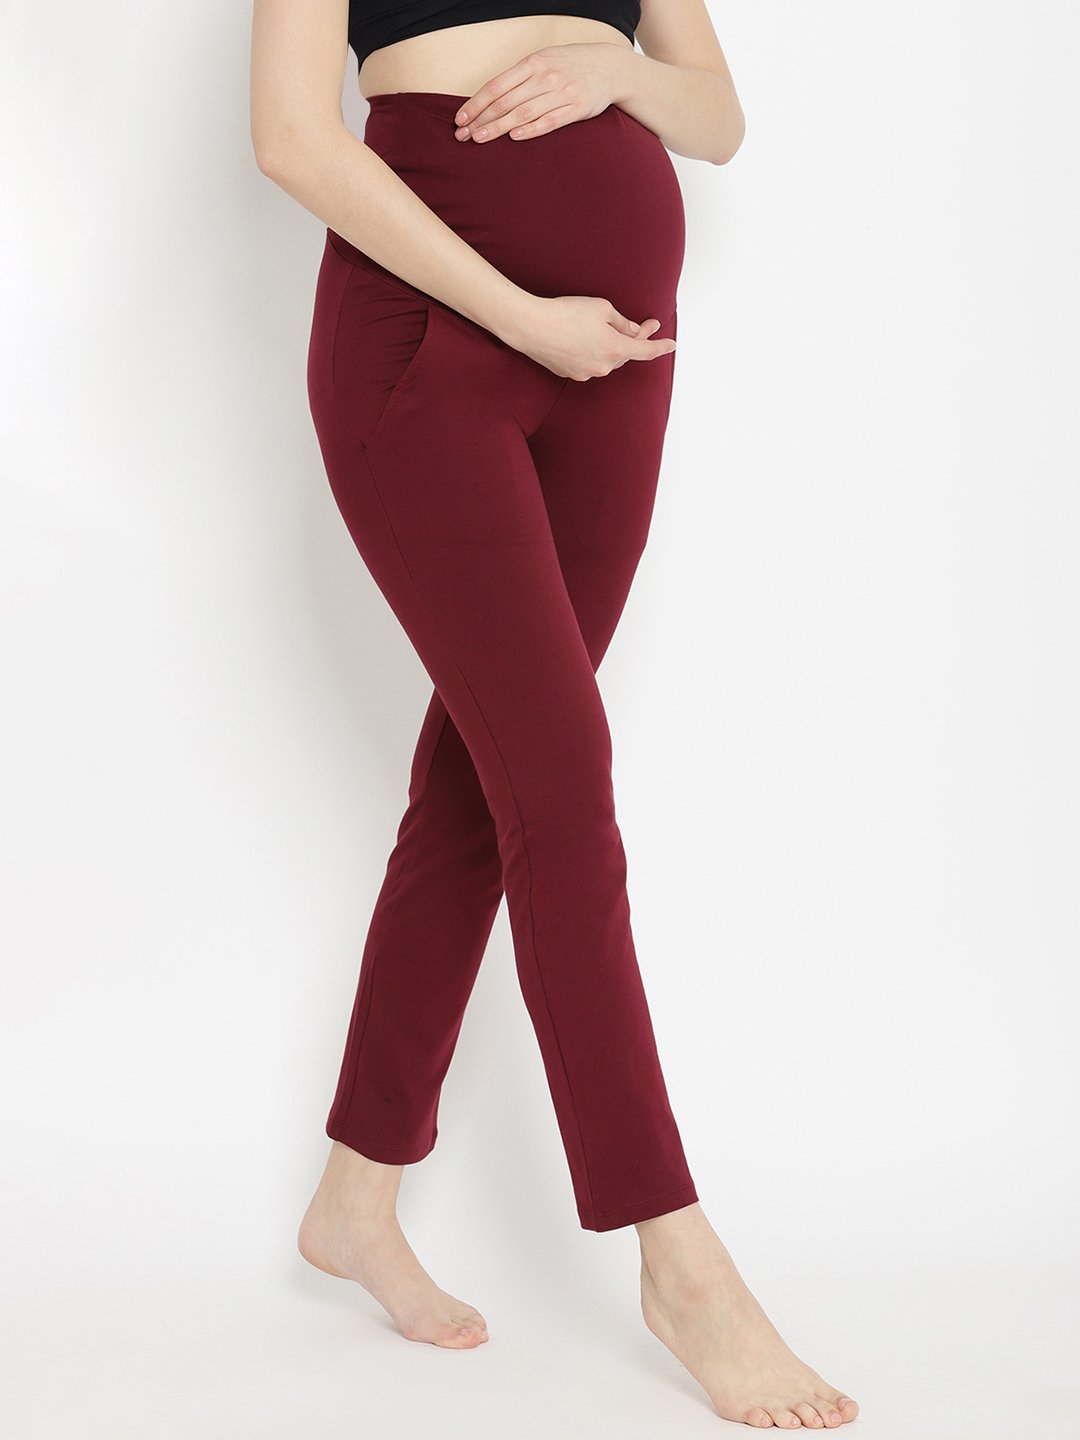 AmShibel Maternity Work Pants Over the Belly Skinny Office Dress Leggings  with Pockets Maternity Clothes for Pregnant Women 